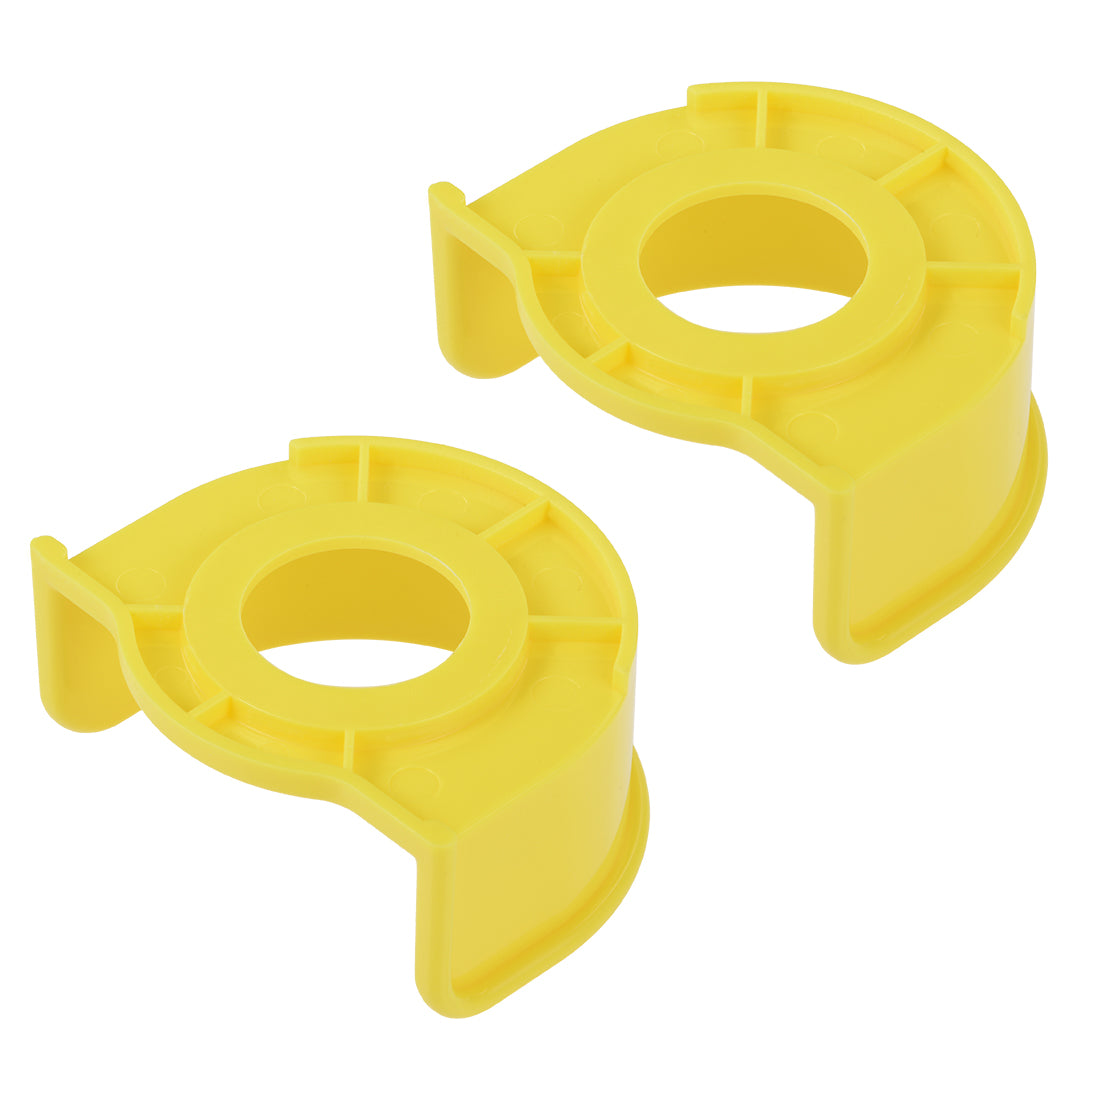 Uxcell Uxcell 30mm Half Circle Emergency Stop Switch Push Switch Button Protective Cover Yellow 2pcs